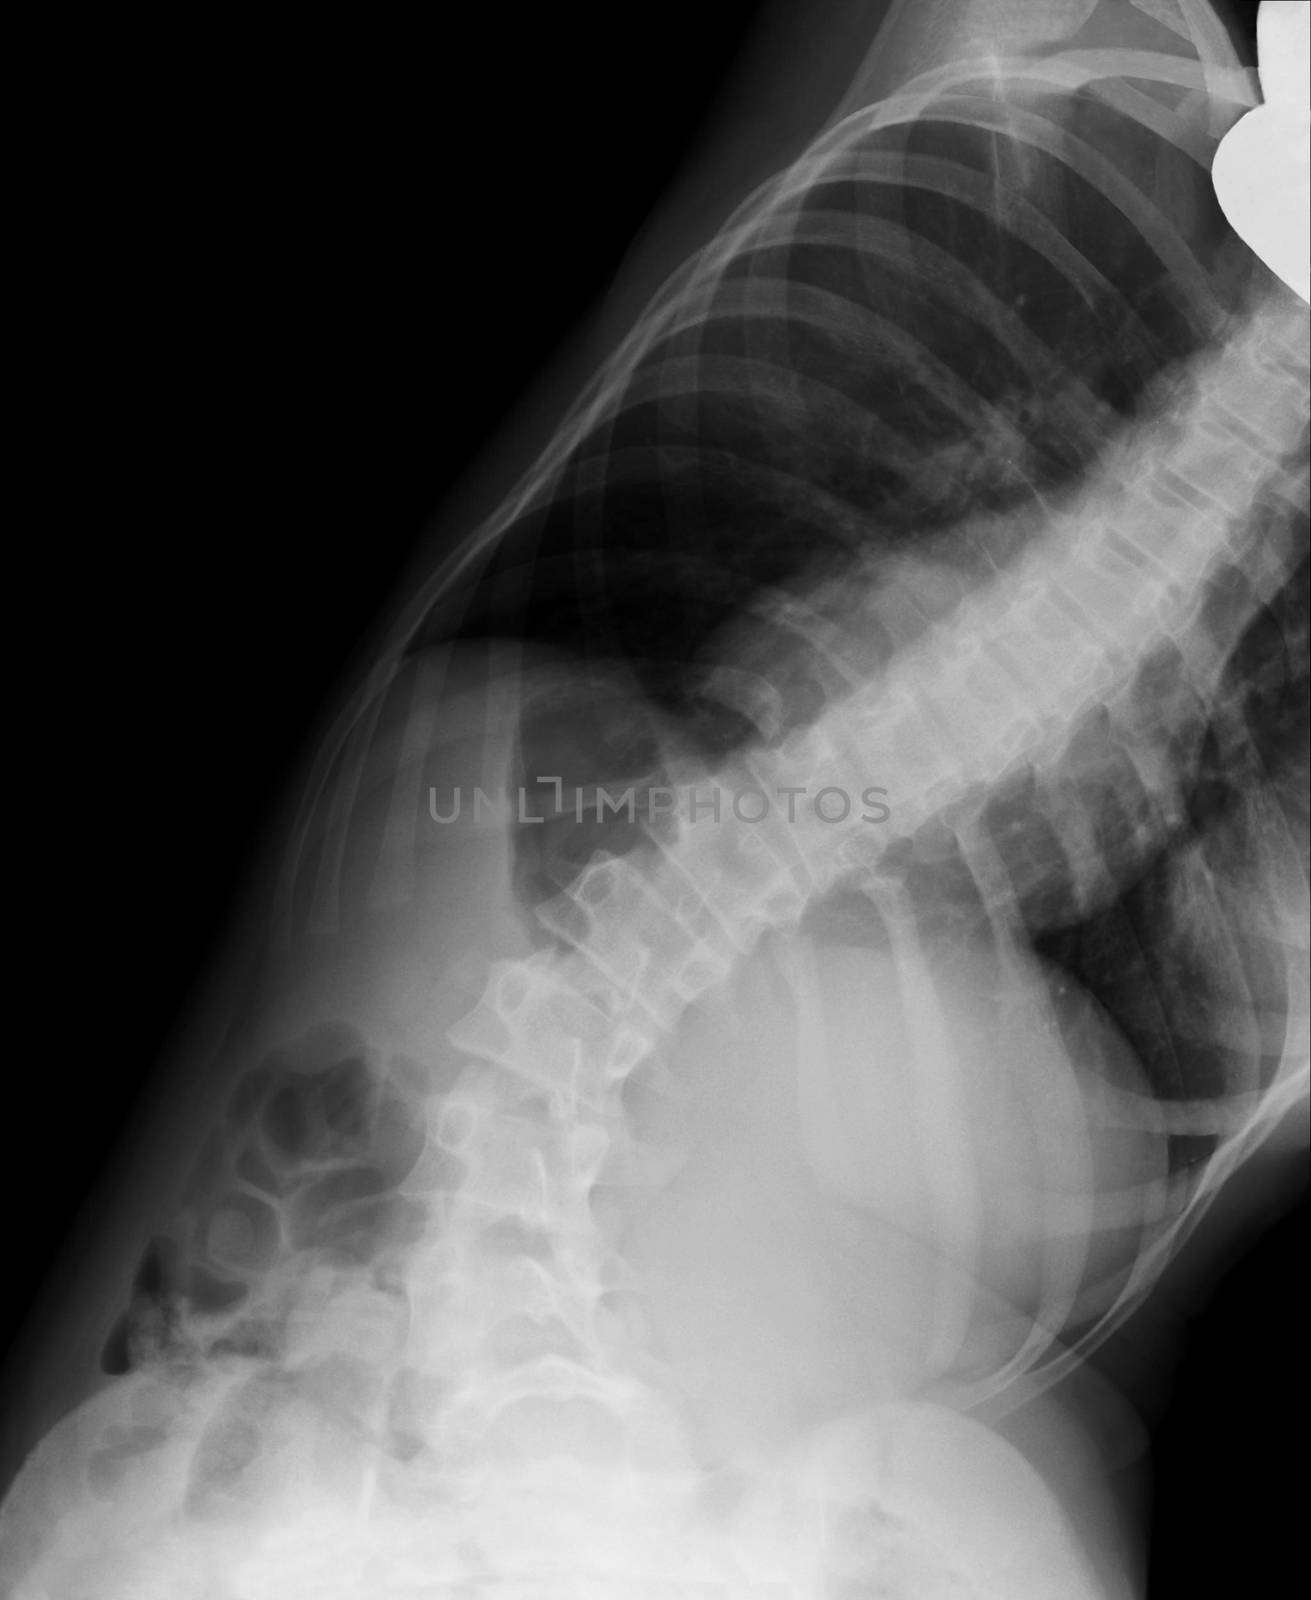 Scoliosis film x-ray show spinal bend in teenager patient by Draw05